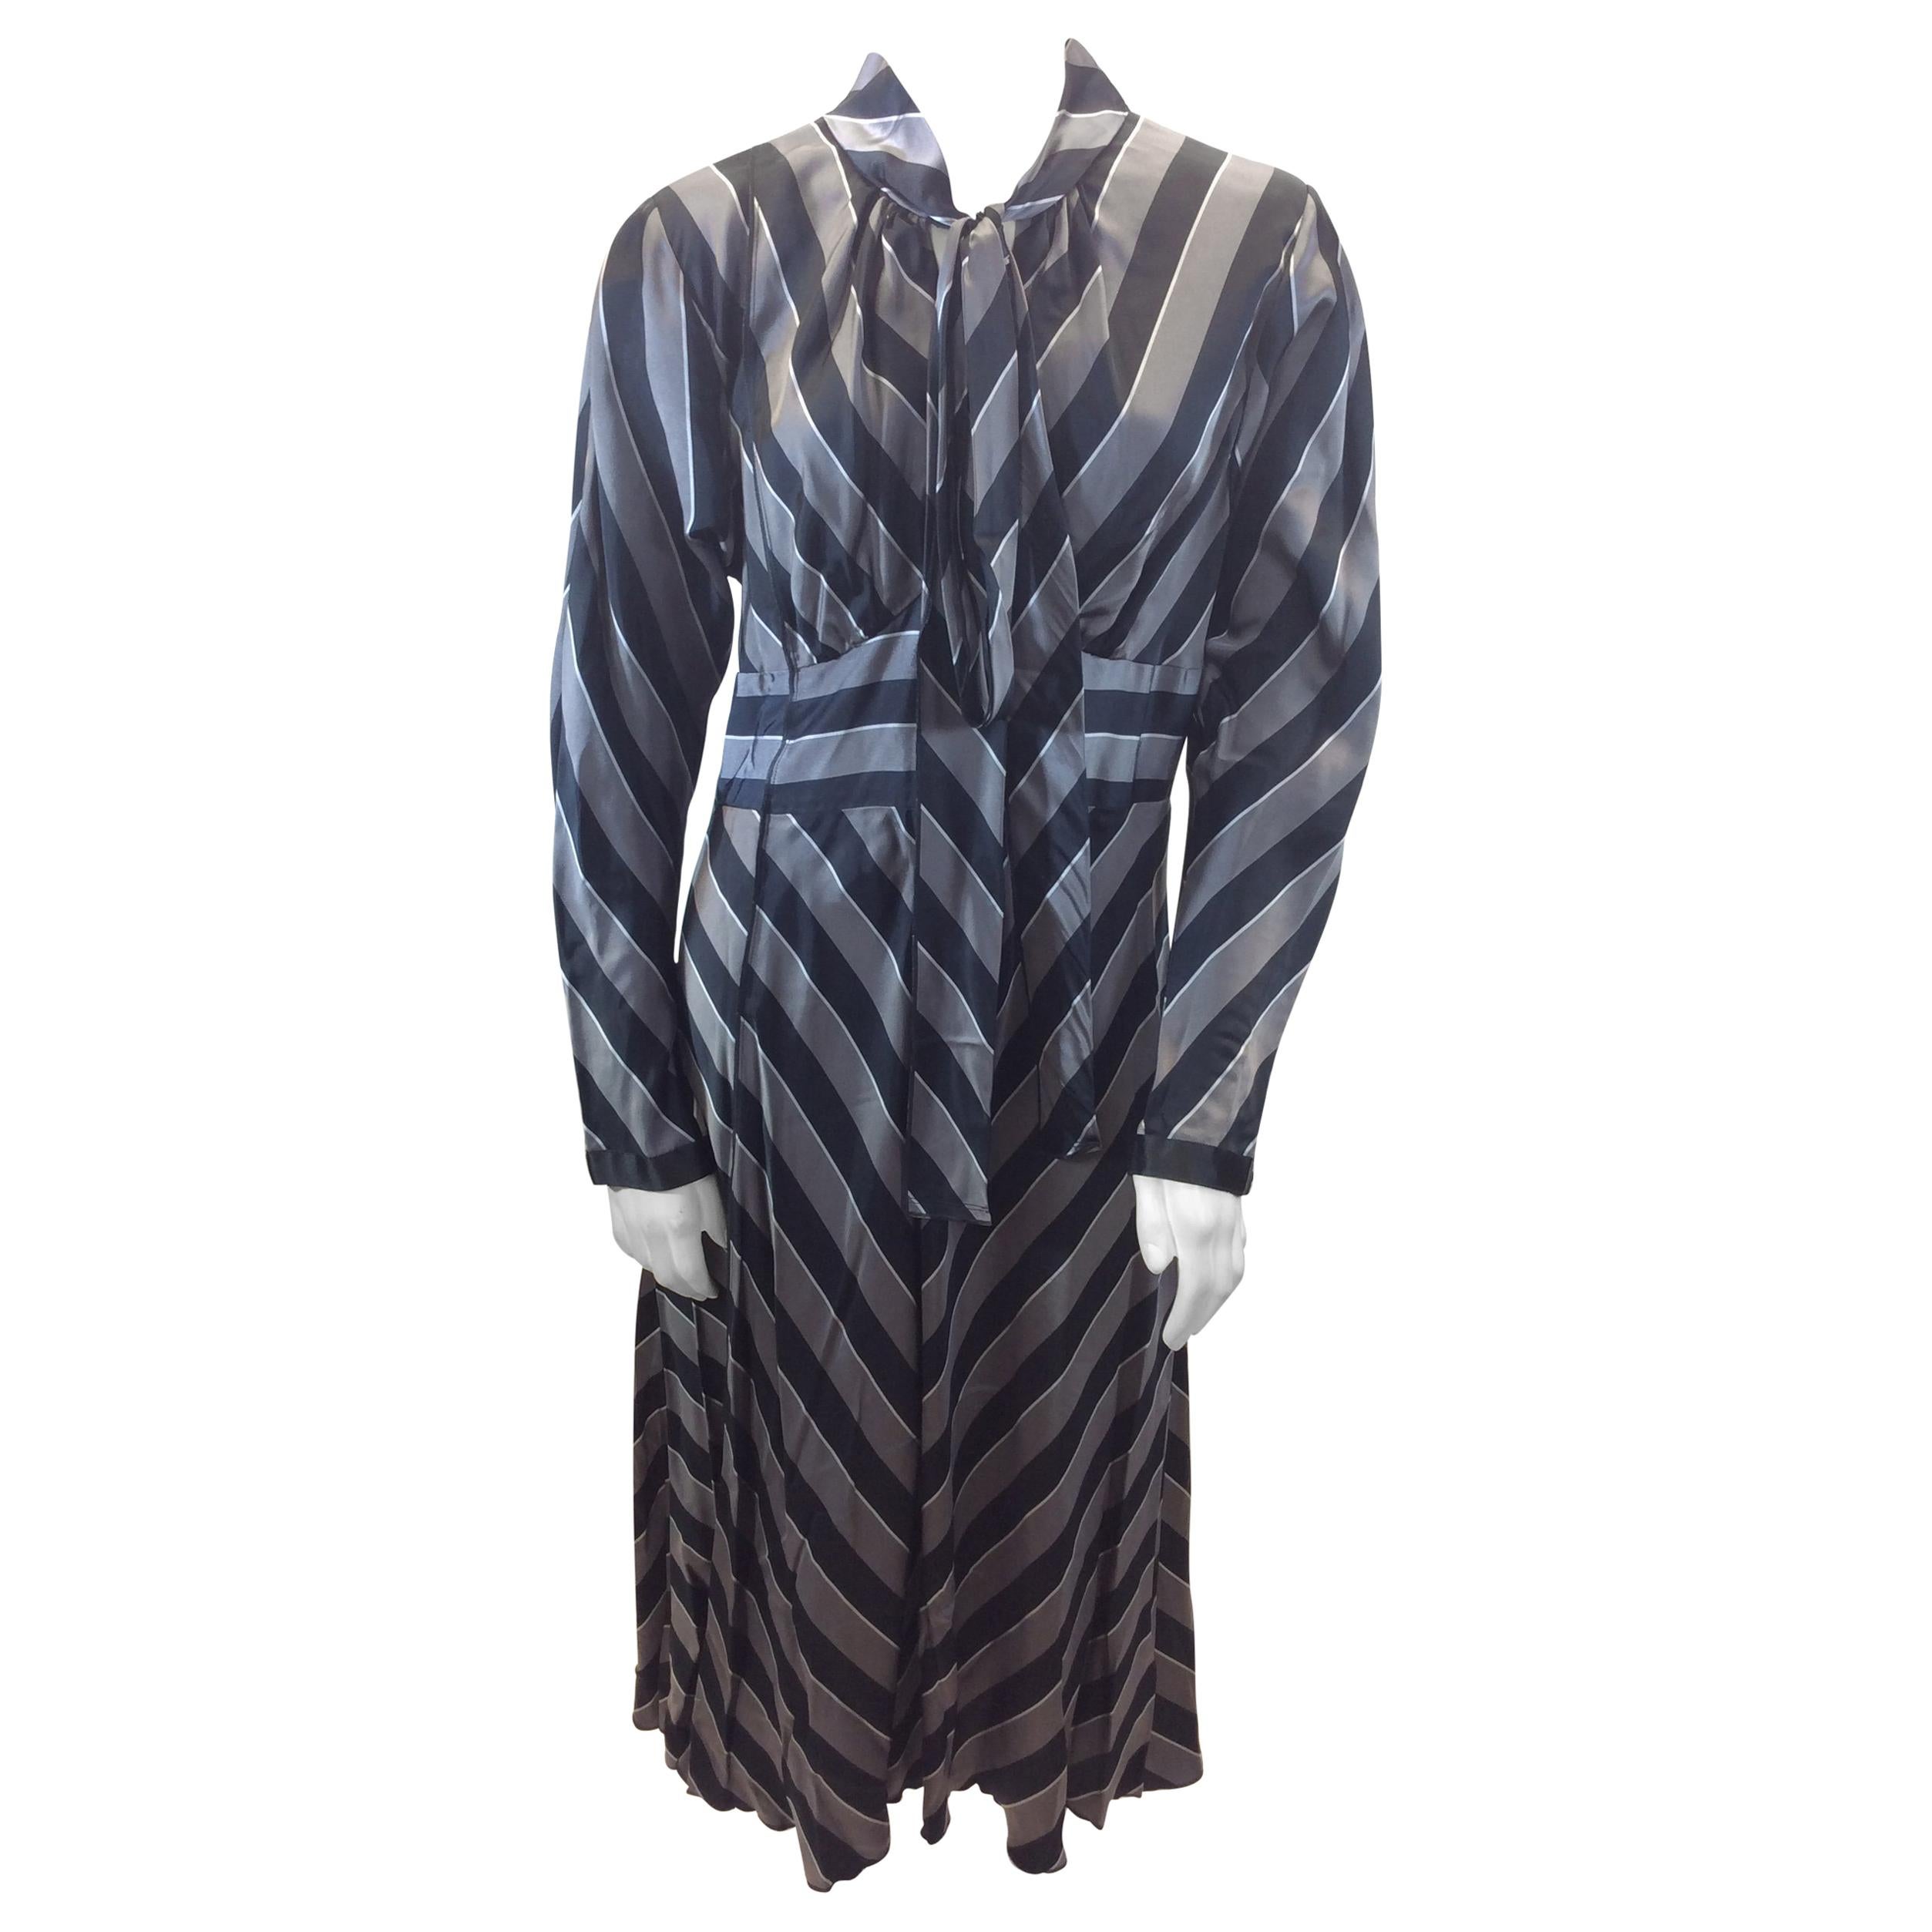 Marc Jacobs Black and Grey Stripe Dress NWT For Sale